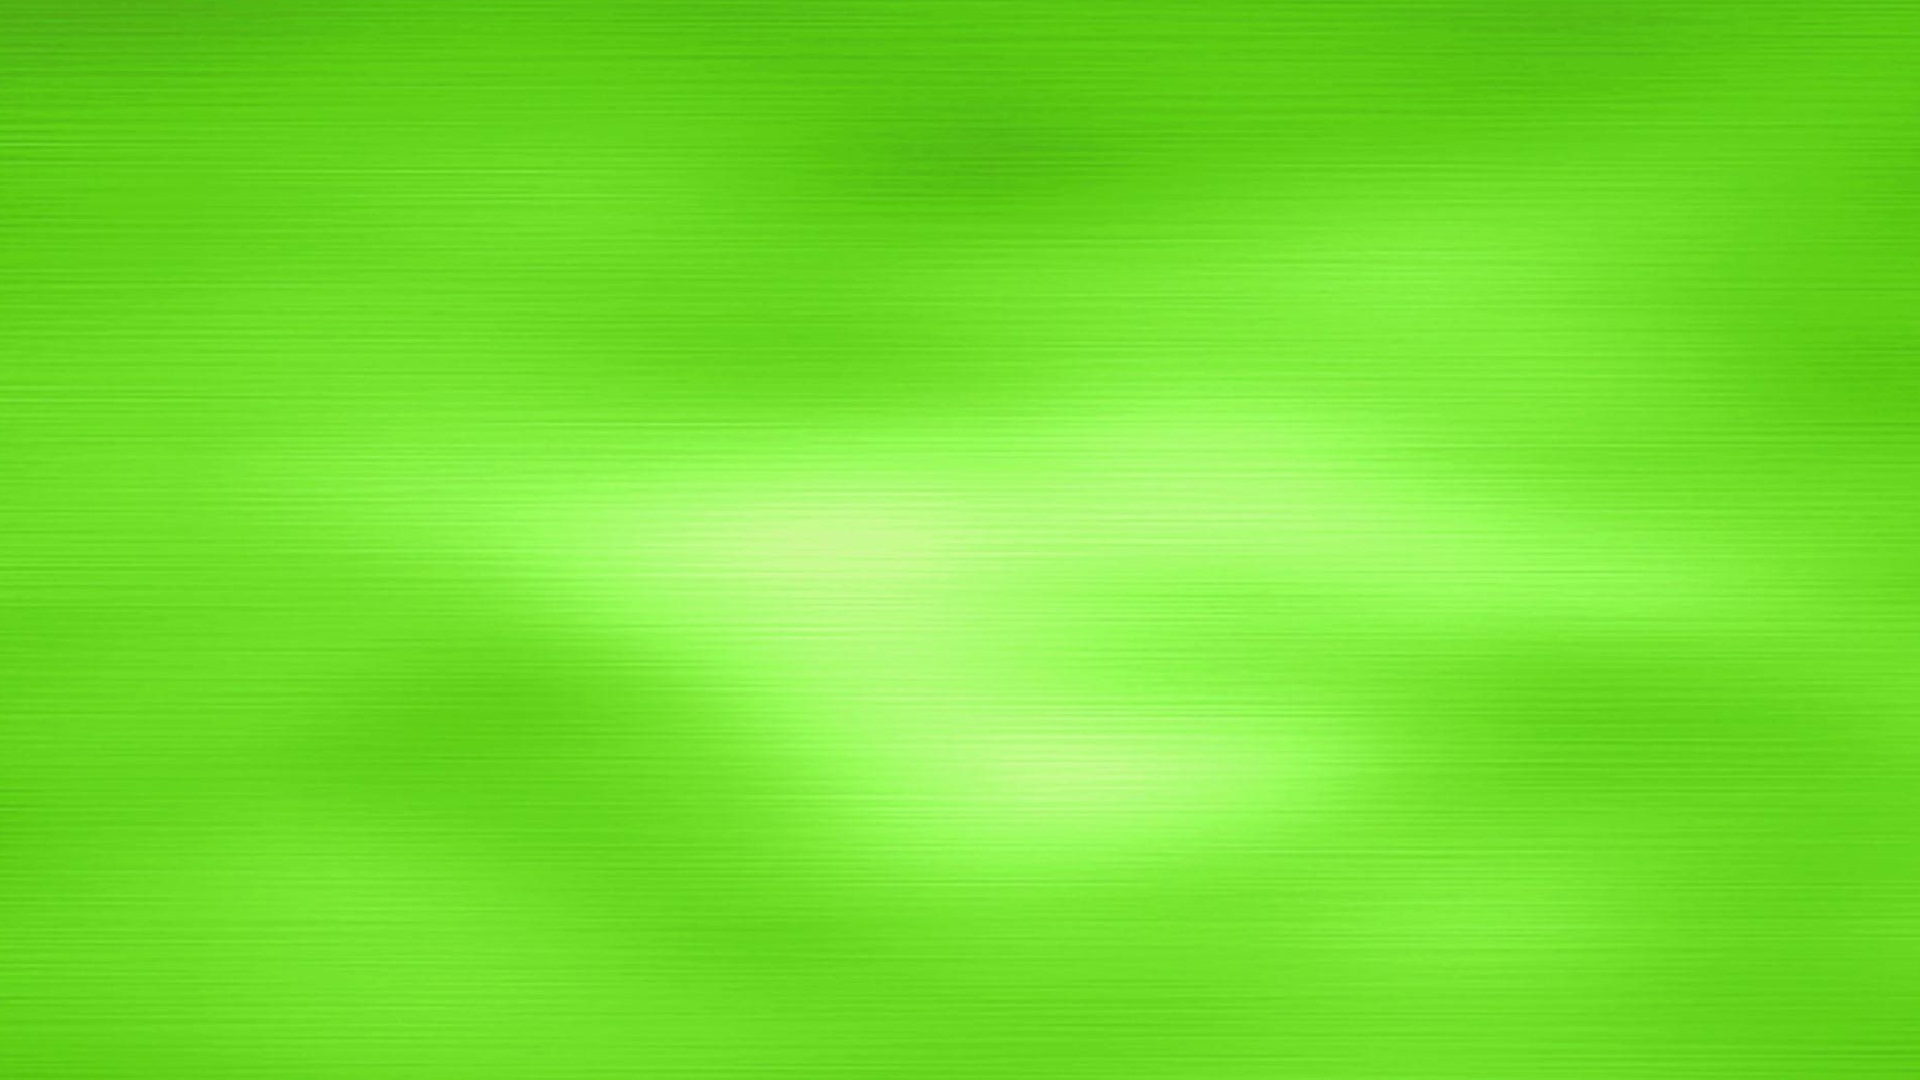 Lime Green Wallpaper with image resolution 1920x1080 pixel. You can use this wallpaper as background for your desktop Computer Screensavers, Android or iPhone smartphones